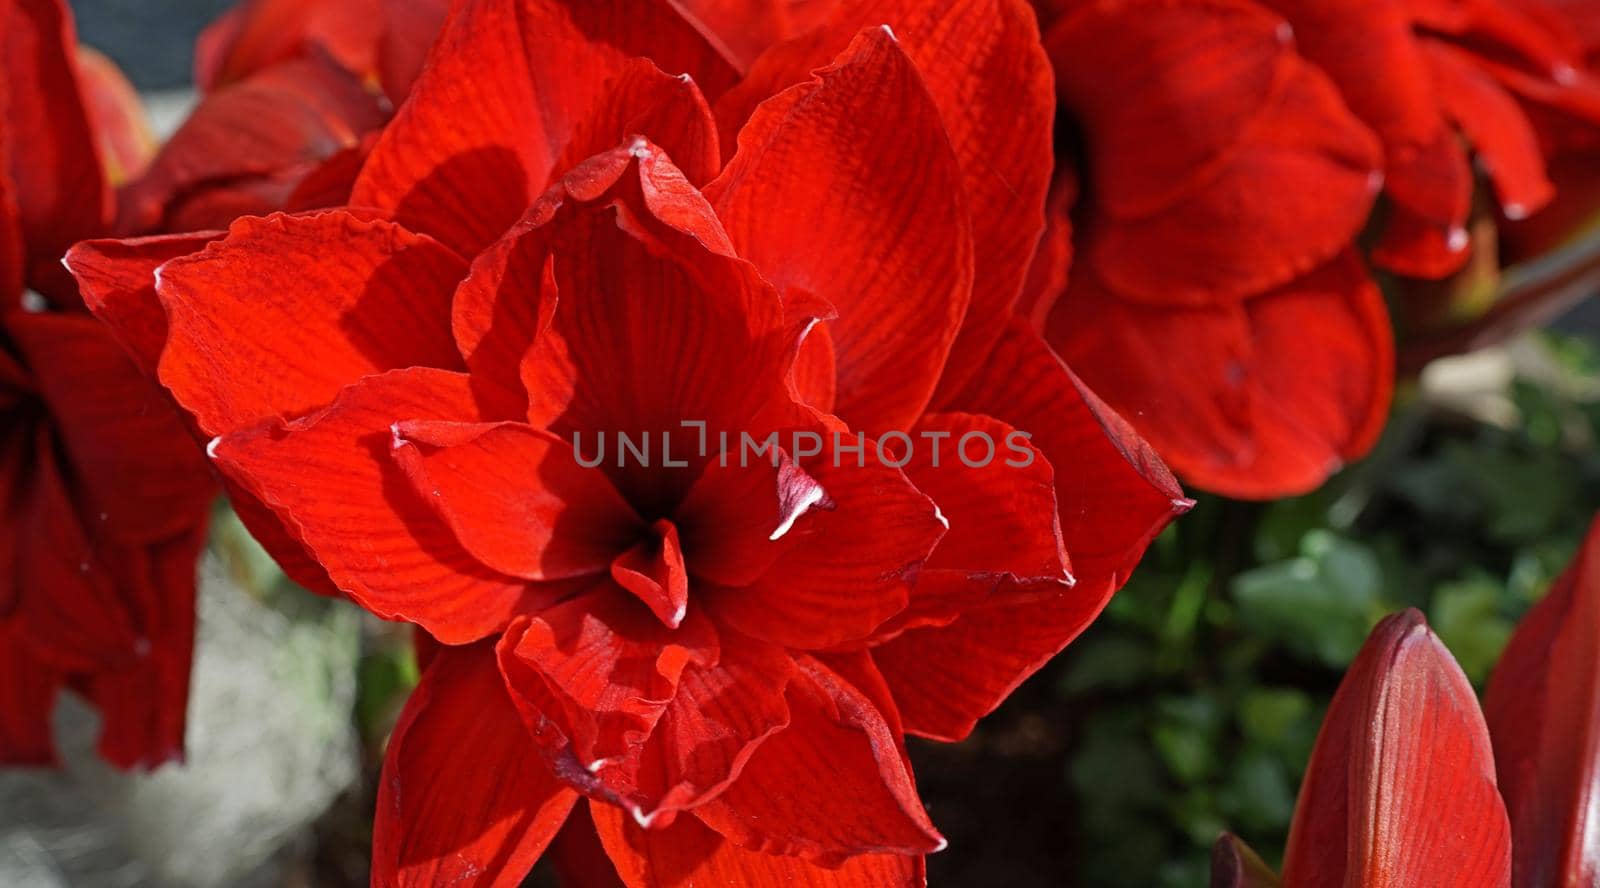 It is actually a Hippeastrum. But the name amaryllis is used for cultivars of the Hippeastrum that are sold as indoor flowering bulbs particularly at Christmas. It’s part of the family Amaryllidaceae. Location: Keukenhof, the Netherlands